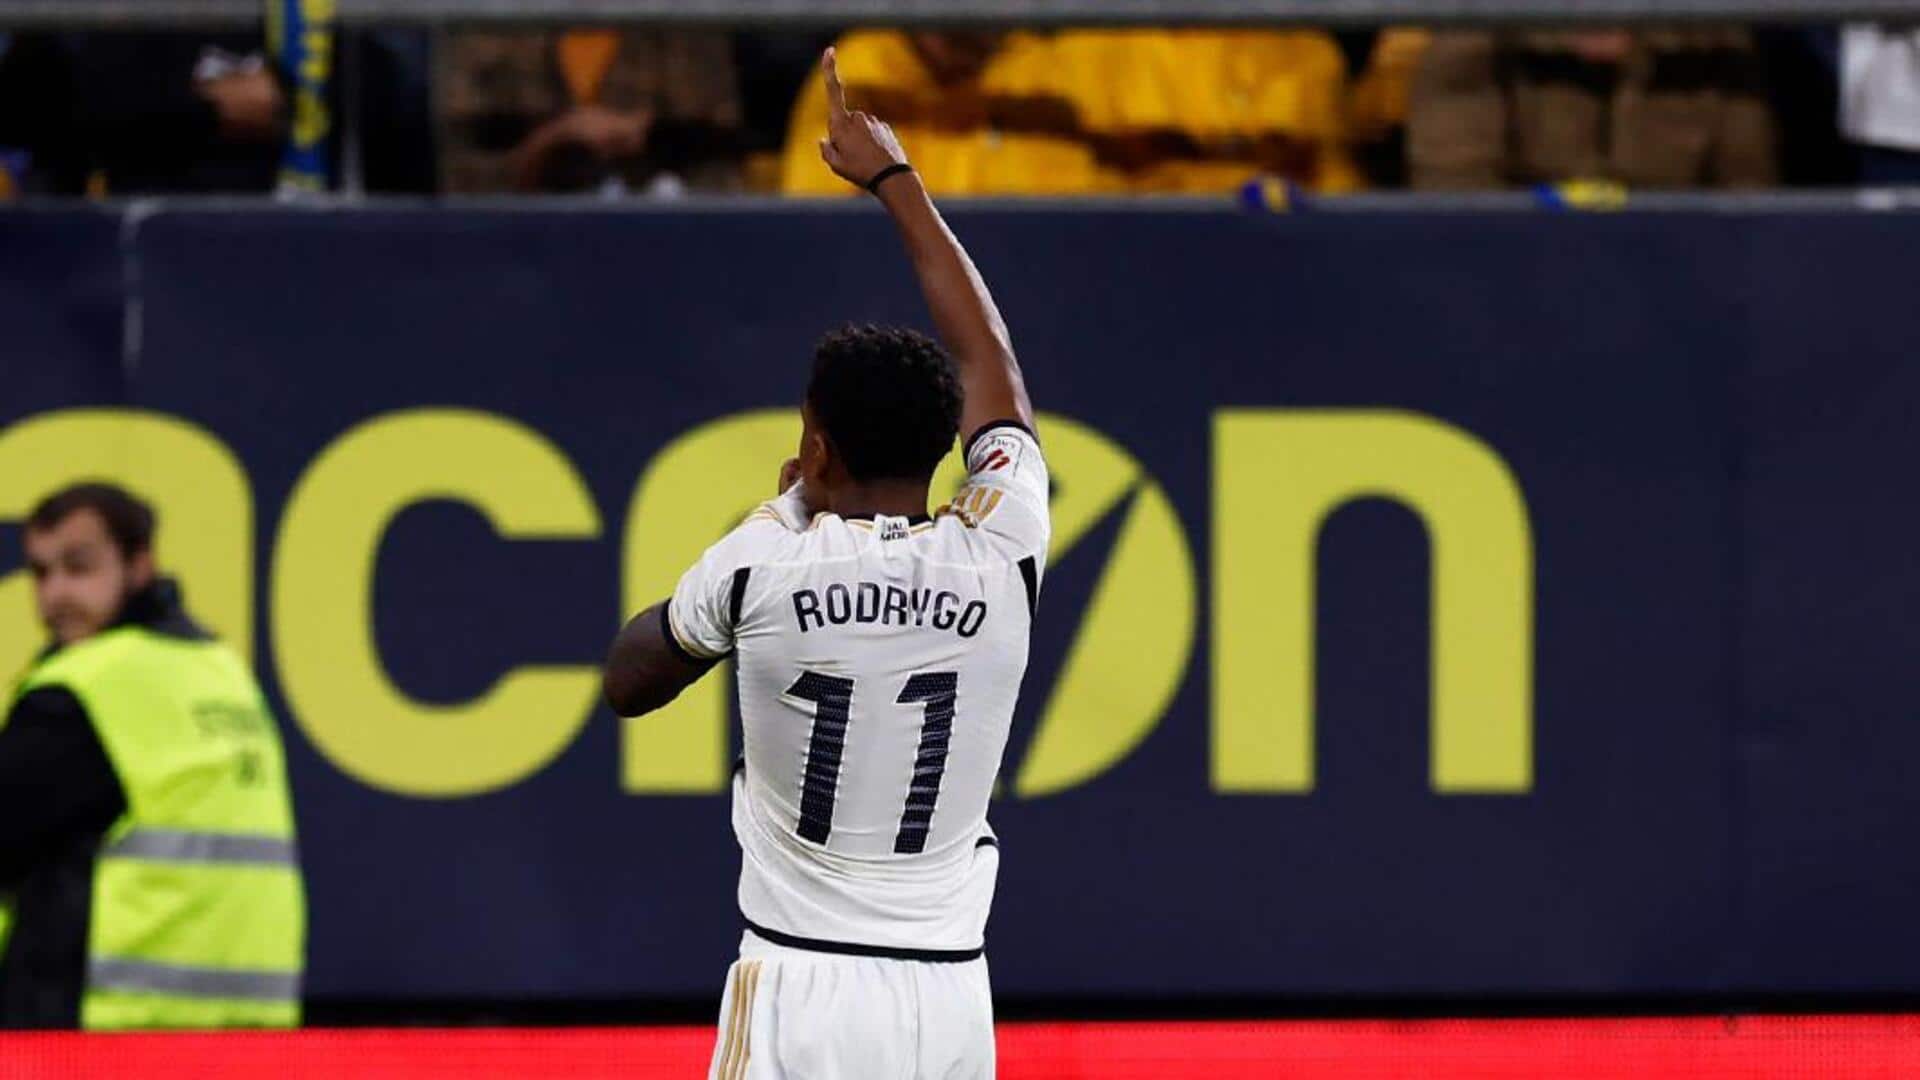 Rodrygo scripts these records in Real Madrid's win over Cadiz